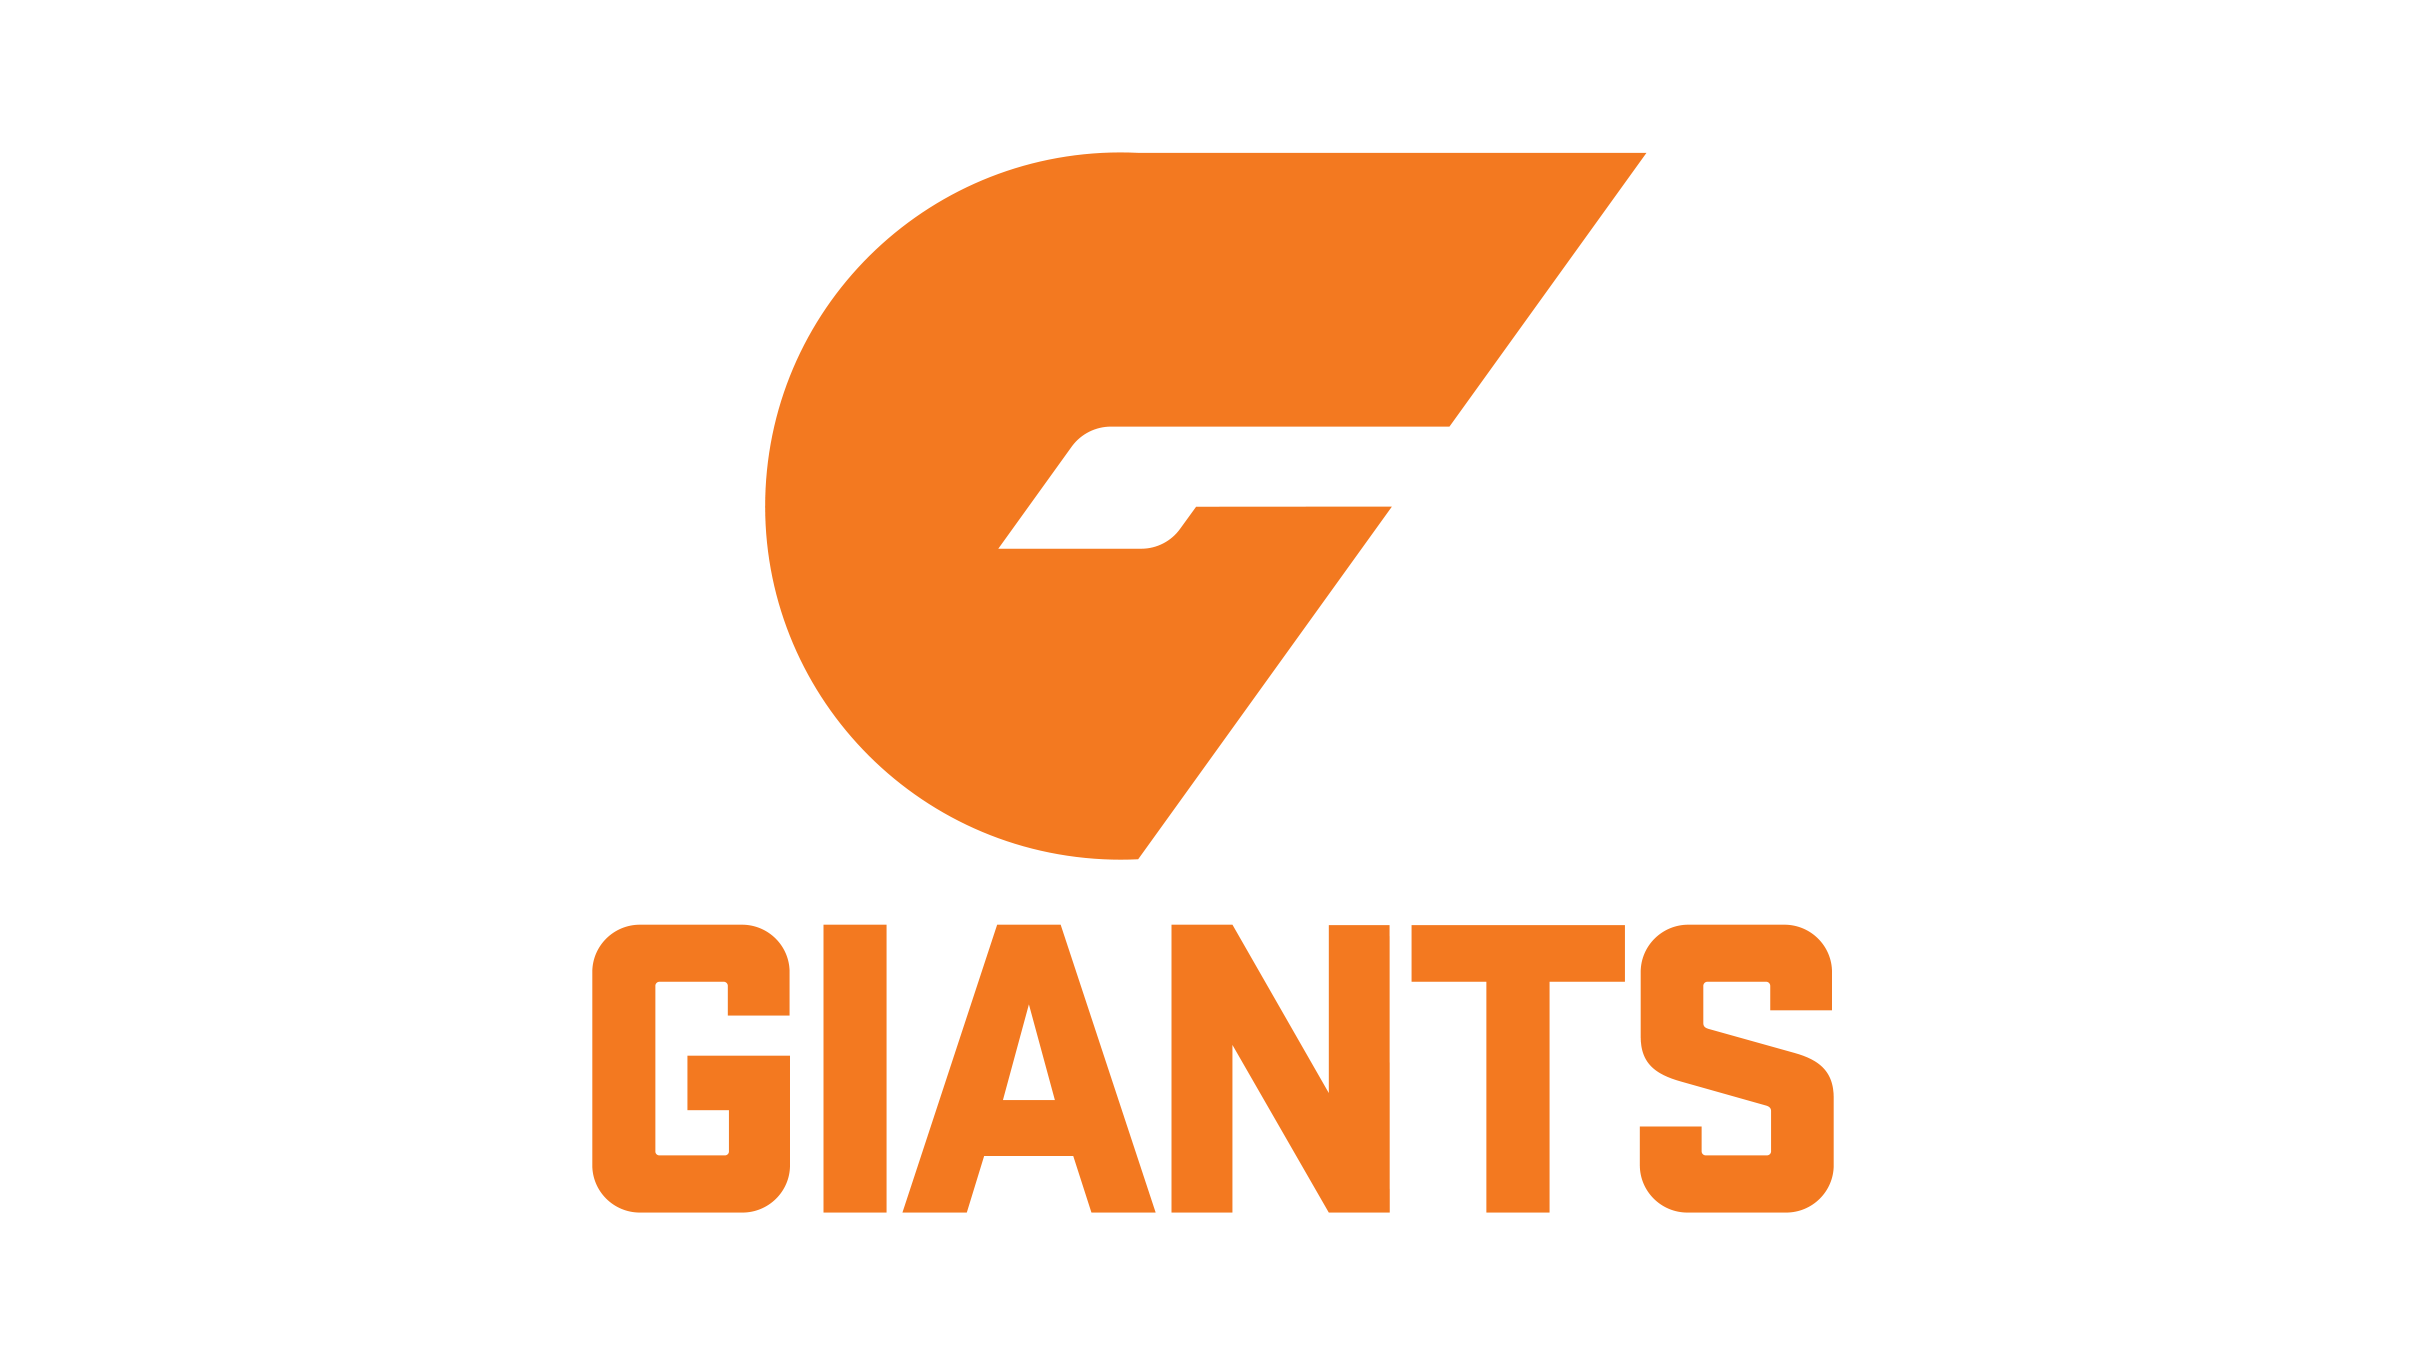 GWS GIANTS v Western Bulldogs in Olympic Park promo photo for Members Onsale presale offer code